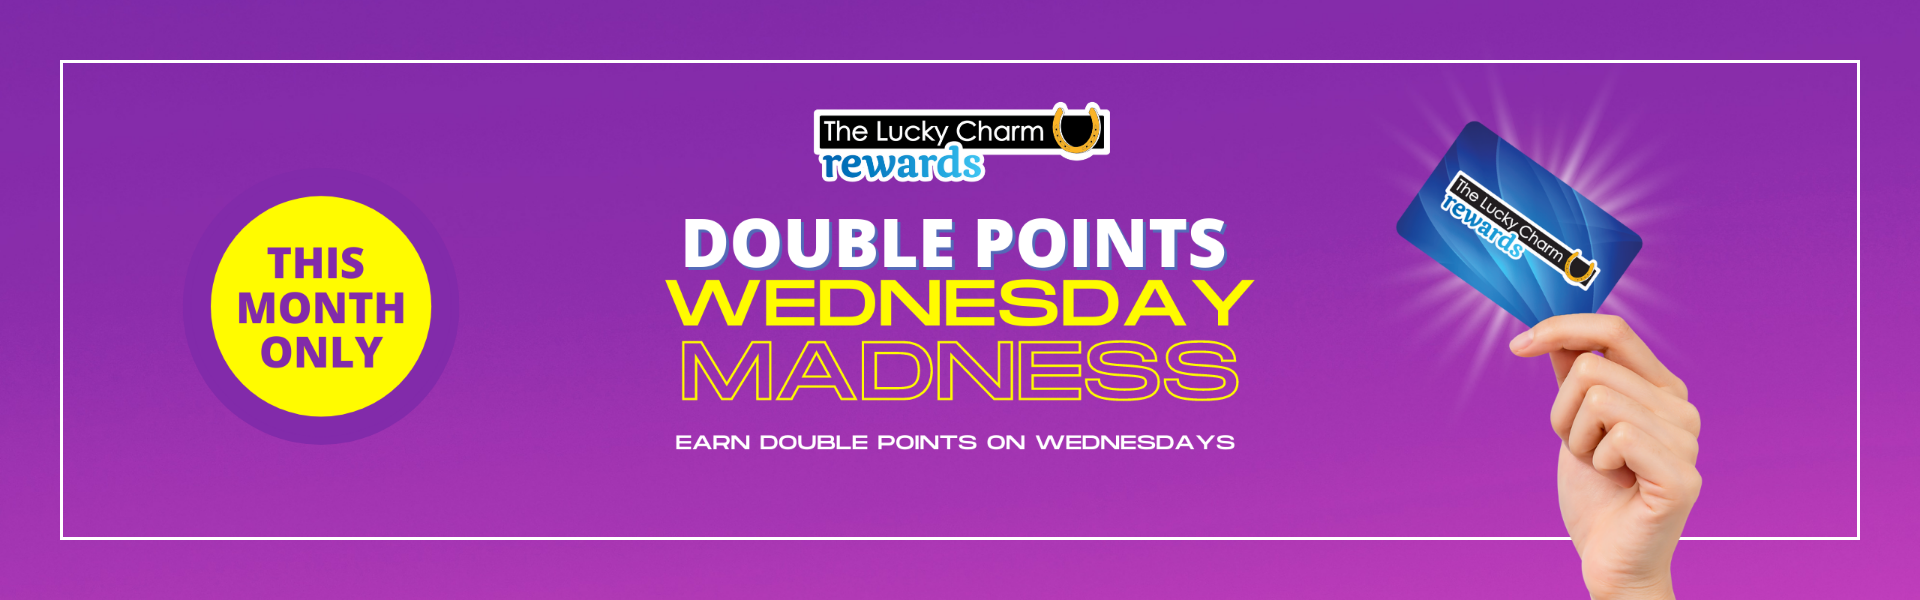 Double points wednesday